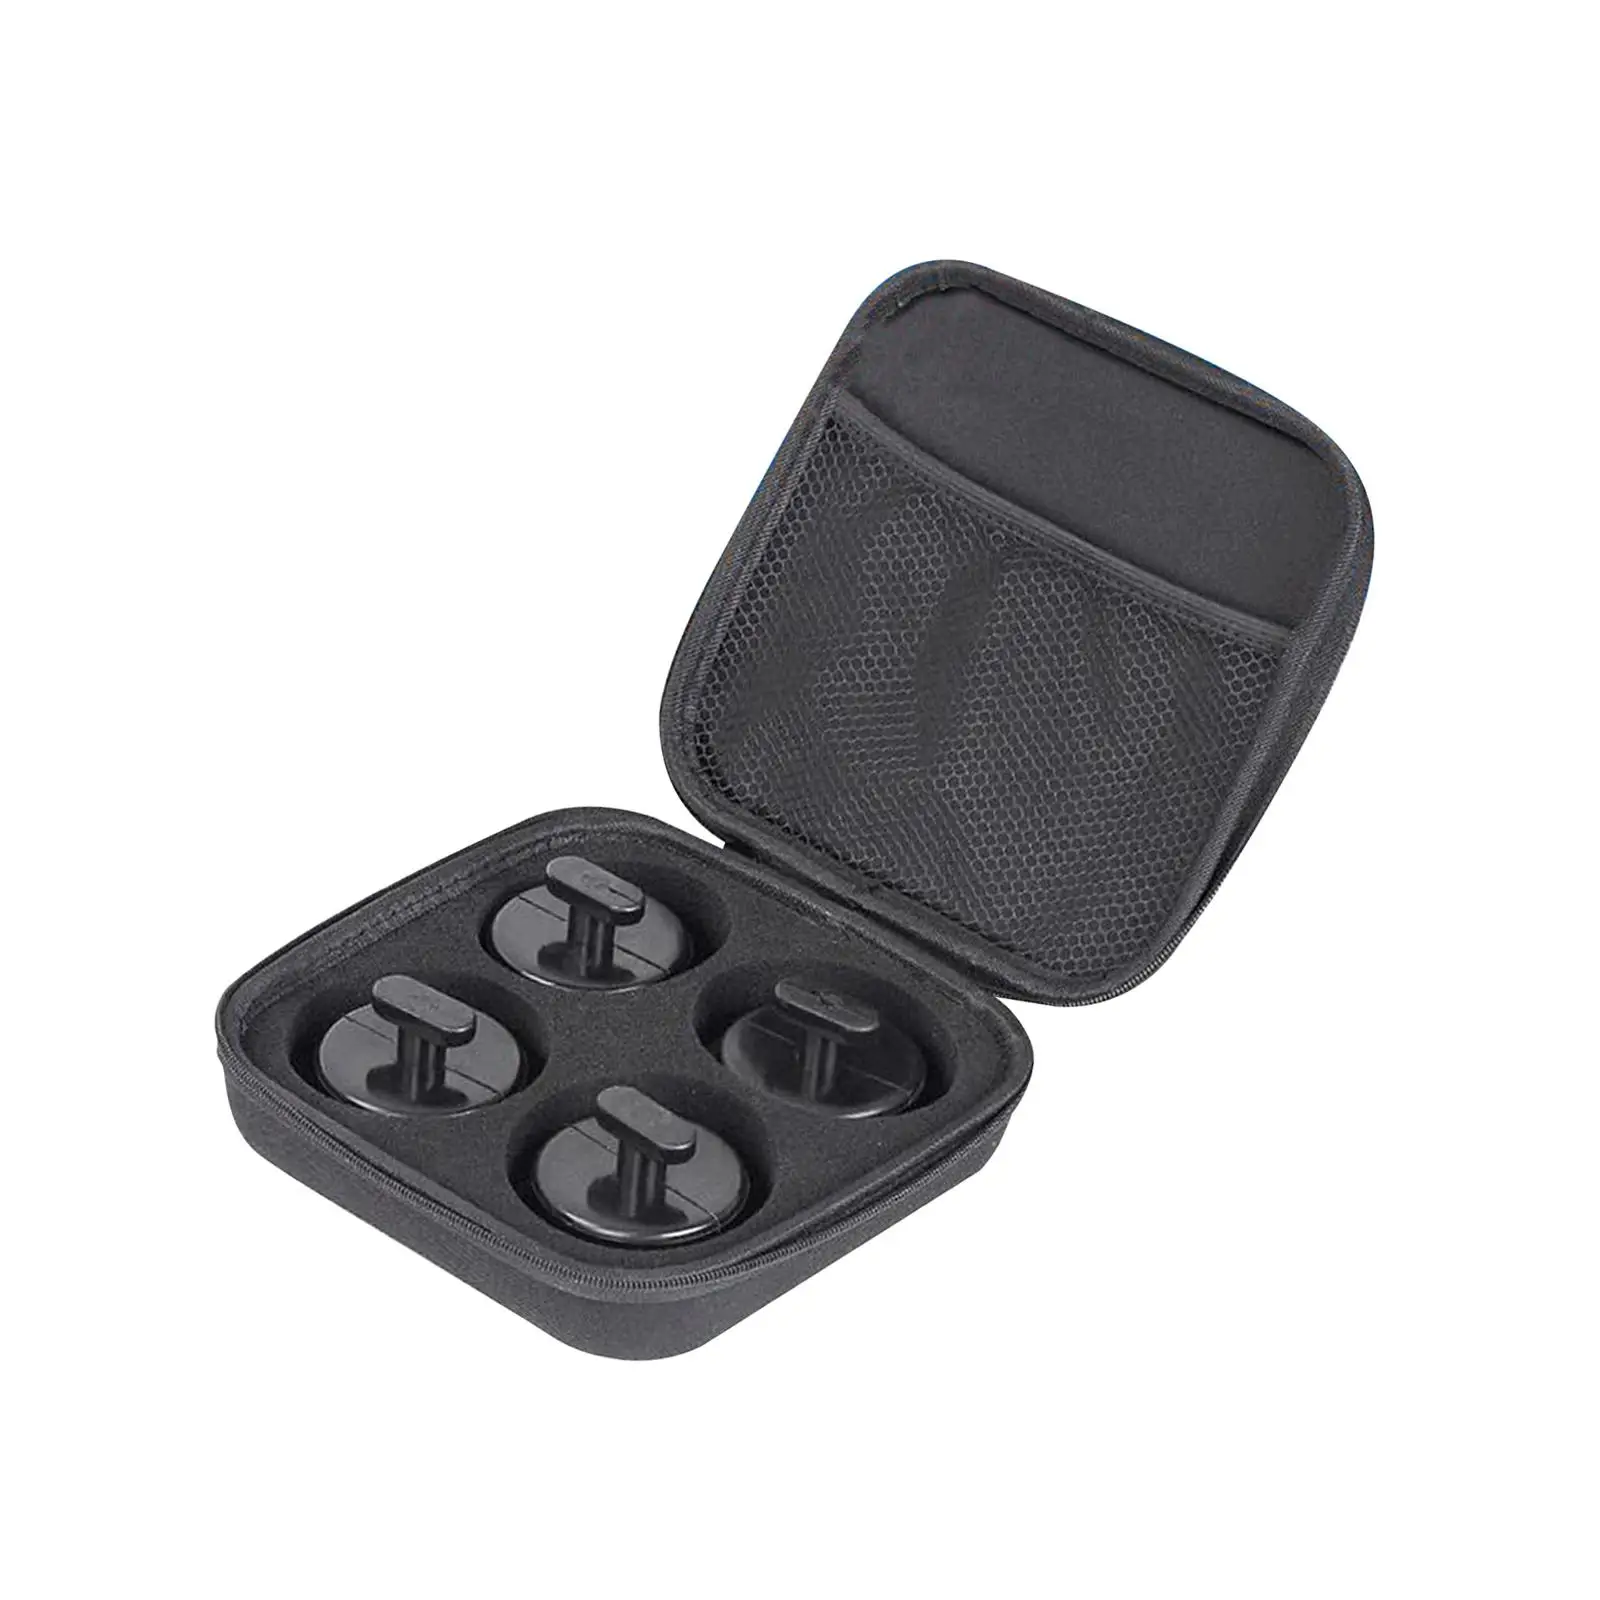 4Pcs Jack Lifting Pads Wear Resistant with Storage Box Jack Pads Adapter for Corvette C5 C6 C7 Spare Parts Repair Tools